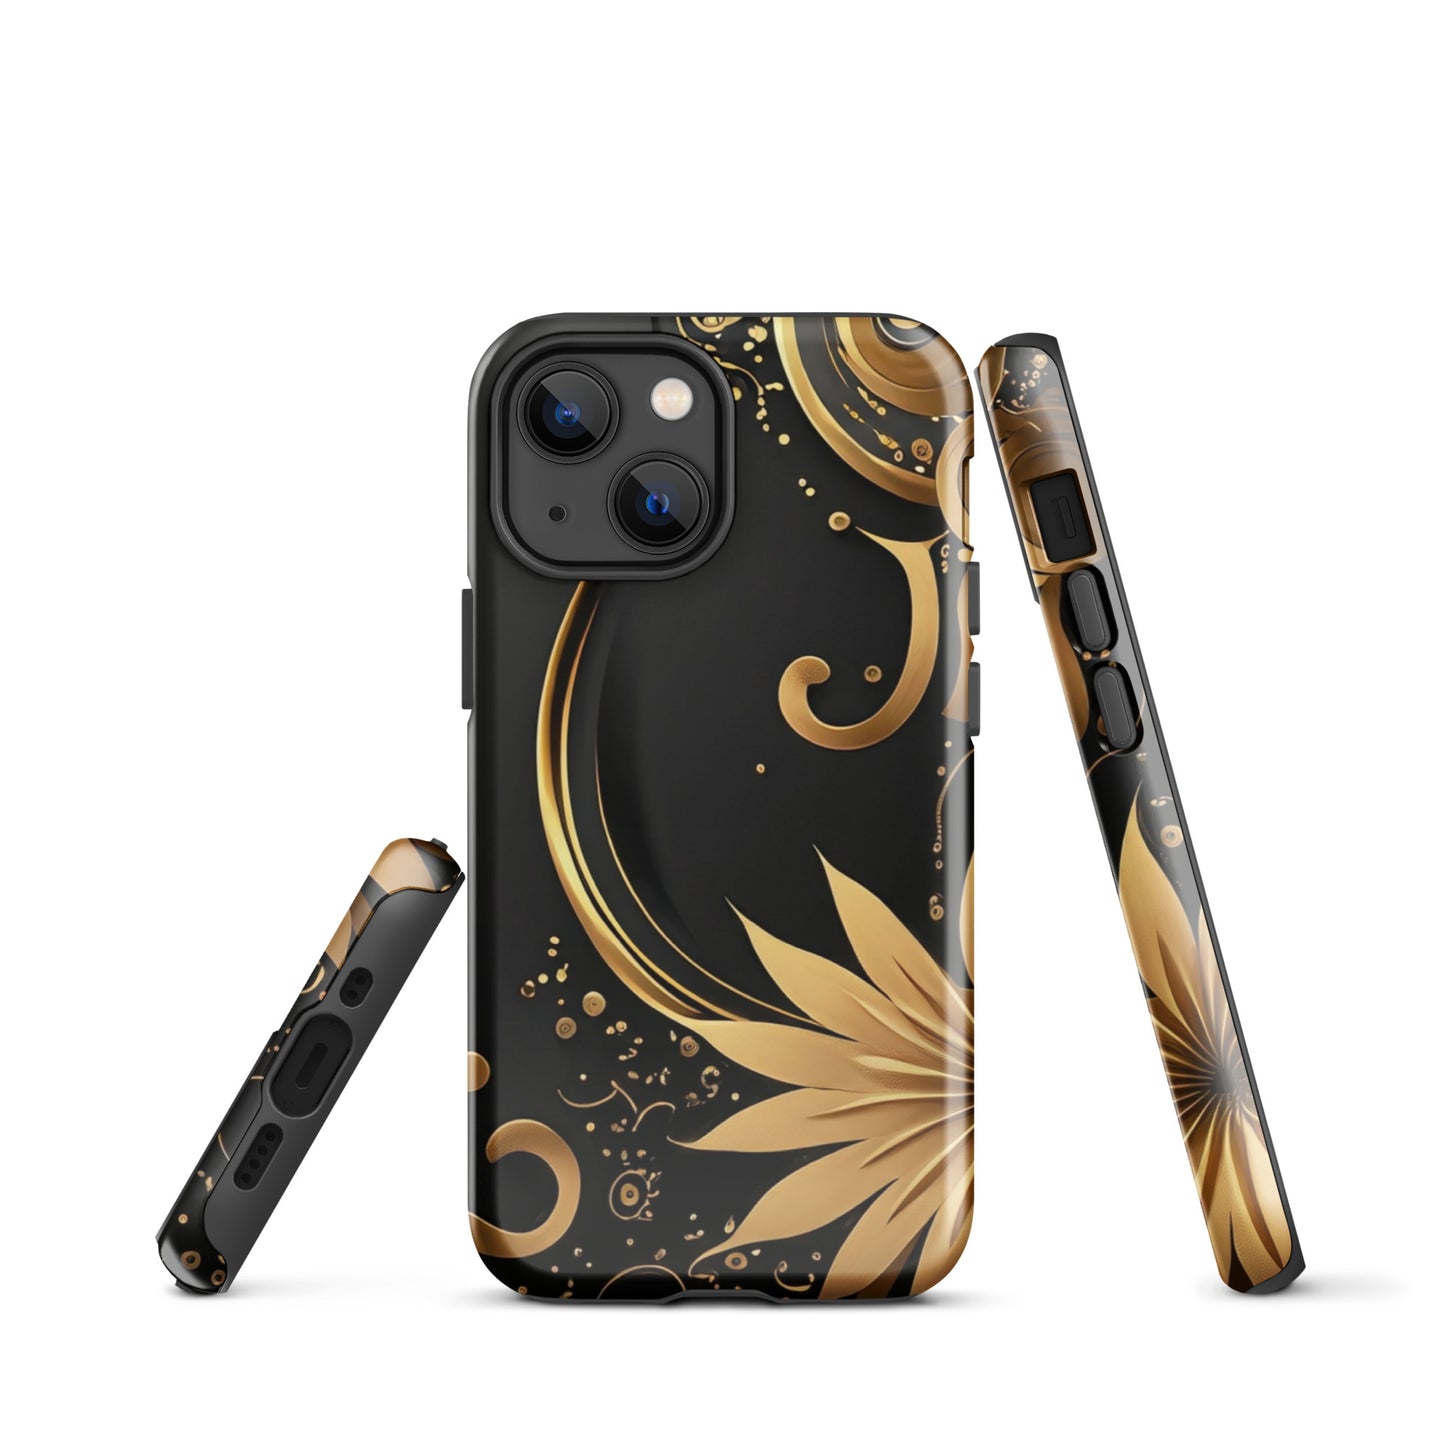 A Golden Flower Case for the iPhone 13 Mini